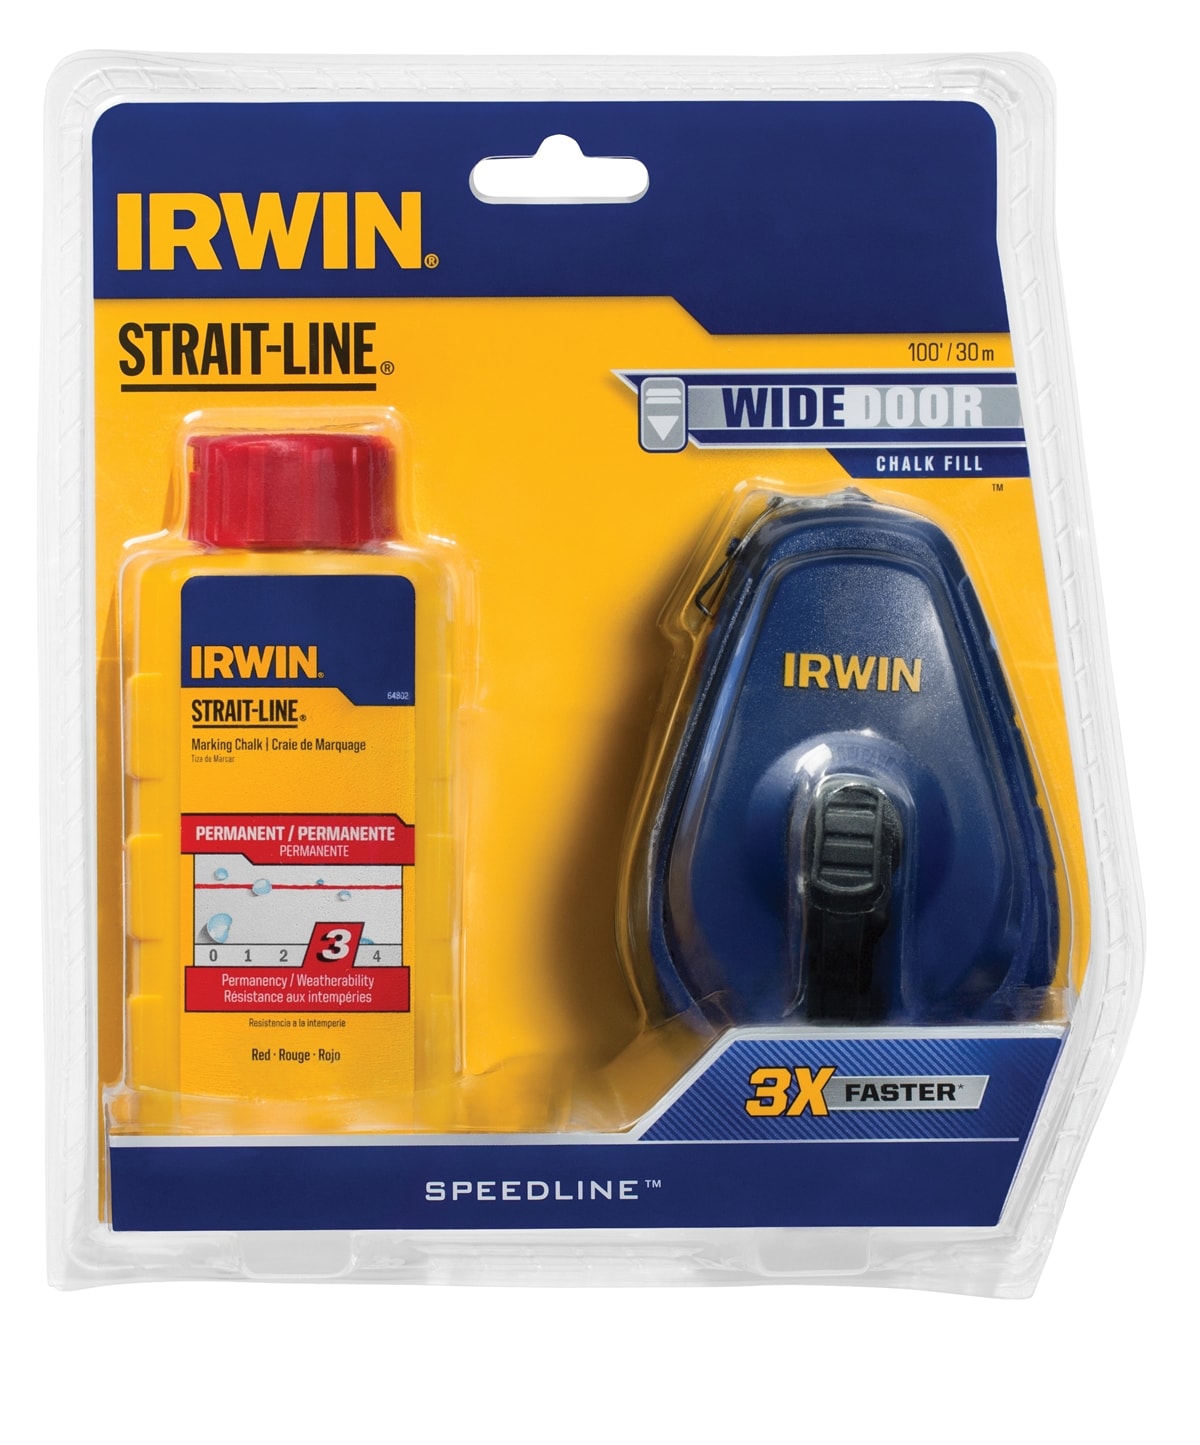 Strait-line chalk line reel with 3 containers of marking chalk